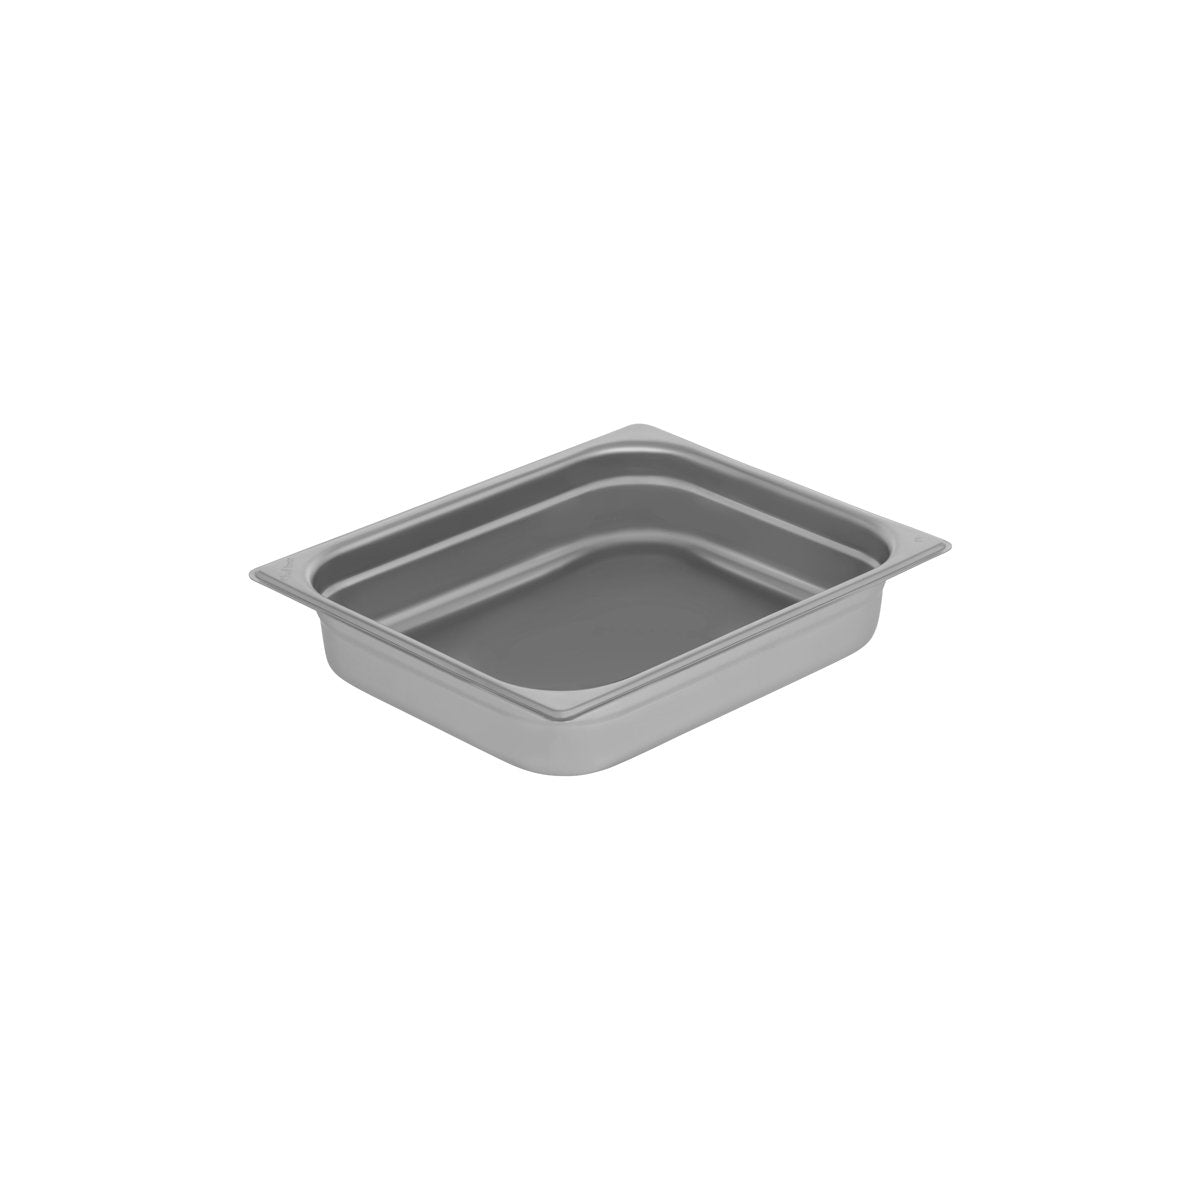 GN-12065 Chef Inox Gastronorm Pan 1/2 Size 65mm Tomkin Australia Hospitality Supplies